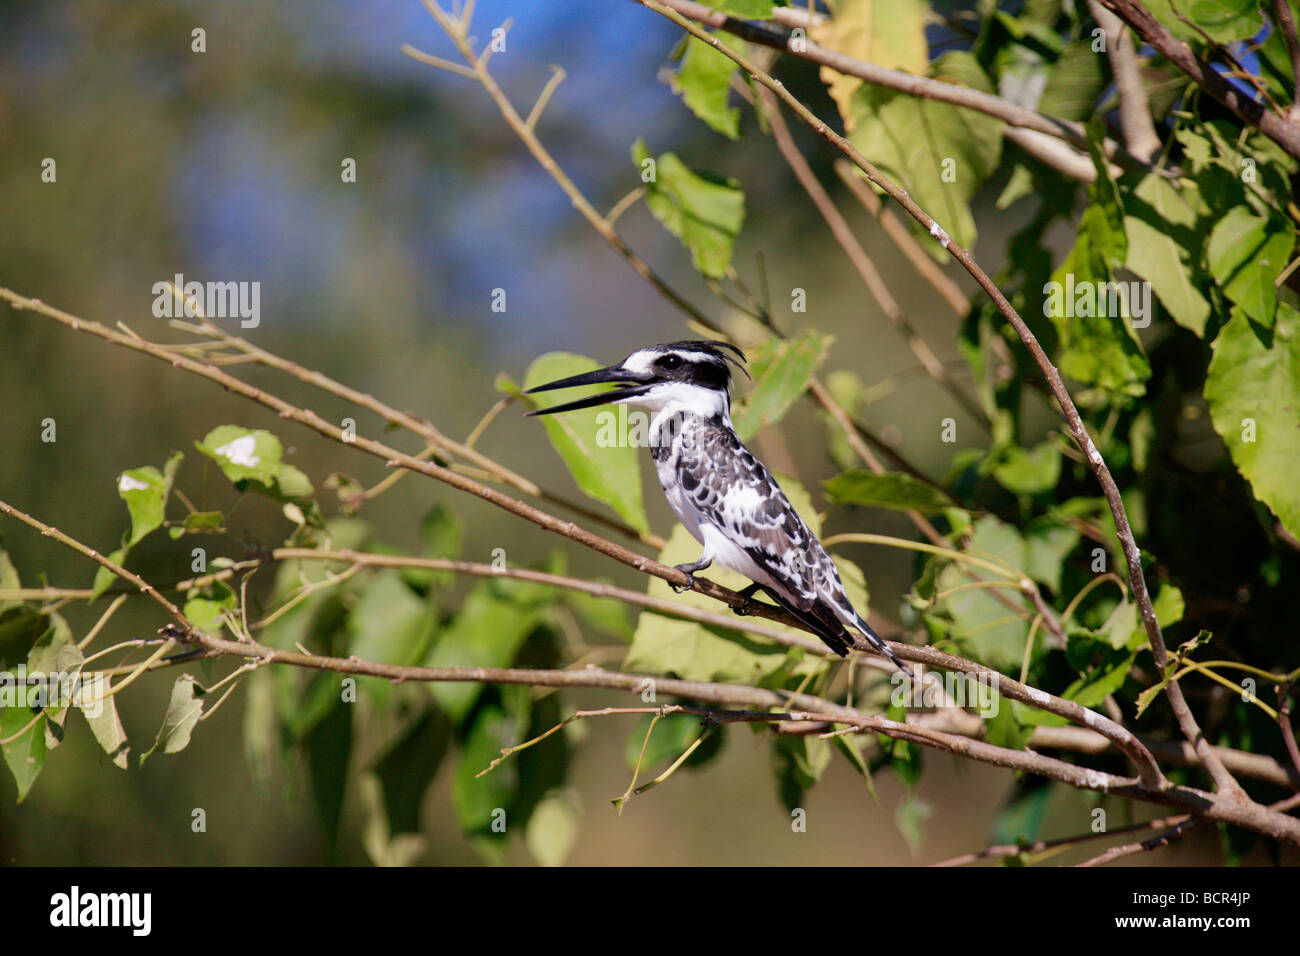 Pied Kingfisher on branch Stock Photo